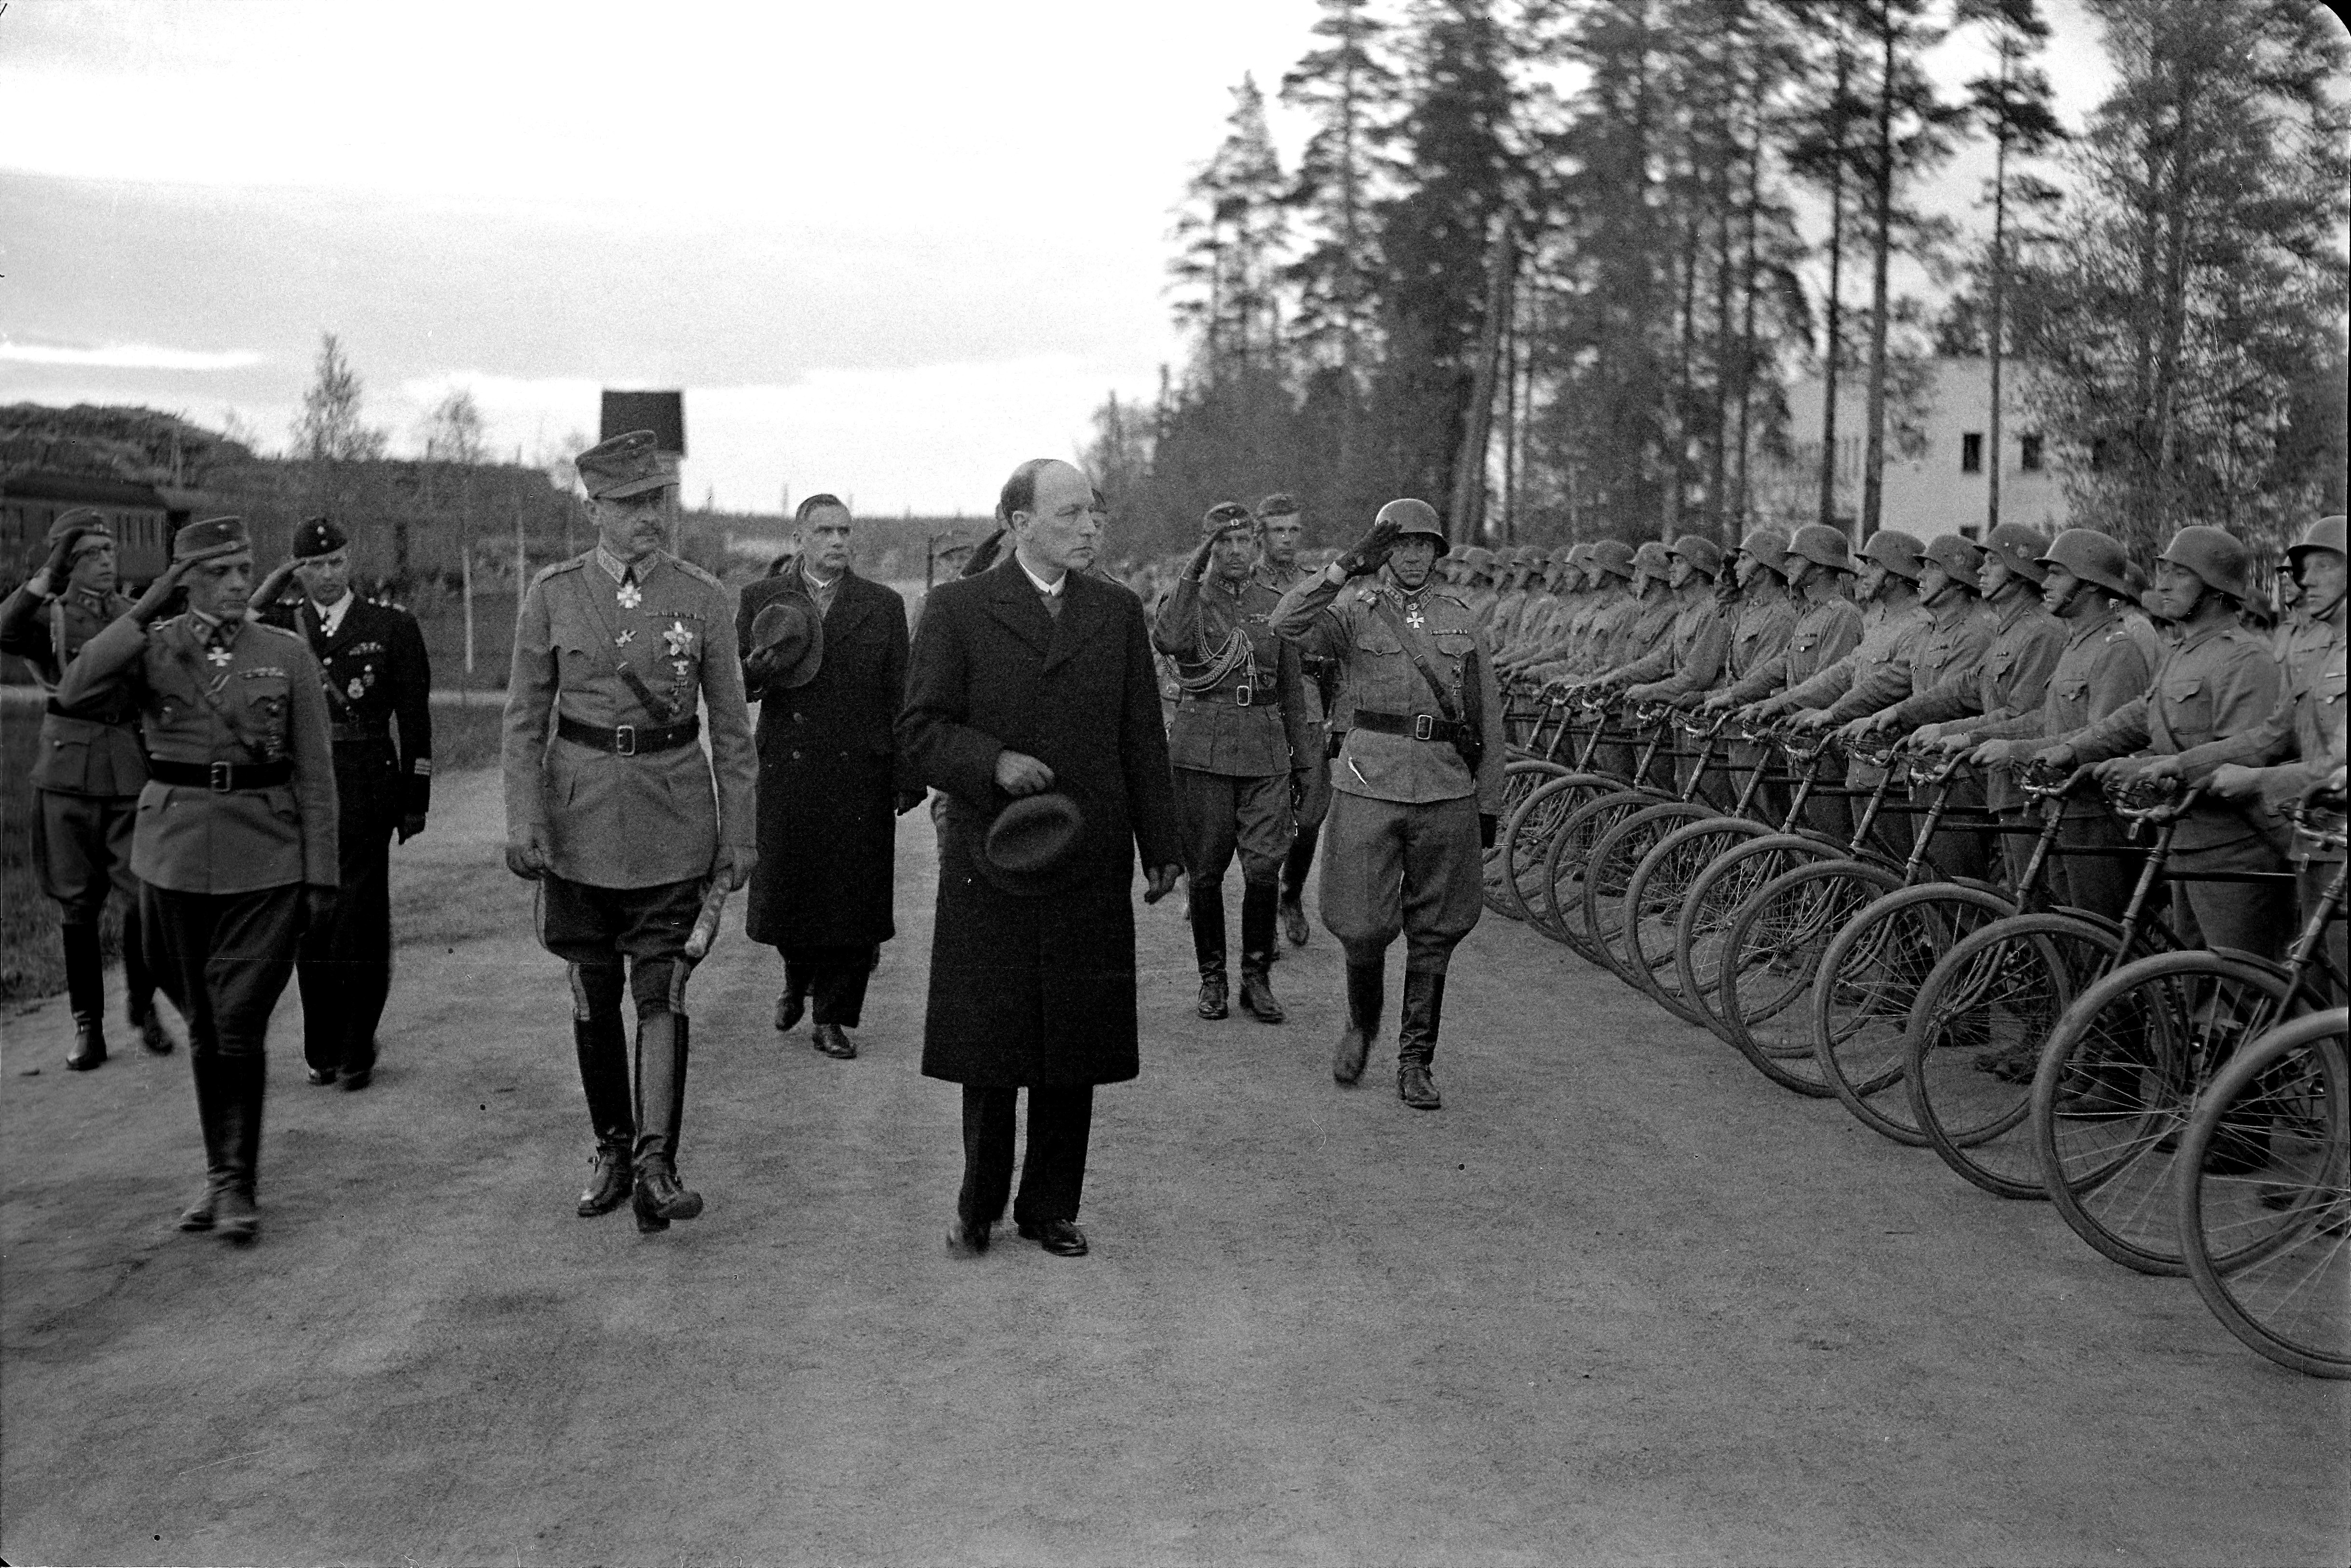 Risto Ryti and Carl Mannerheim reviewing troops at Enso, Finland, 4 Jun 1944